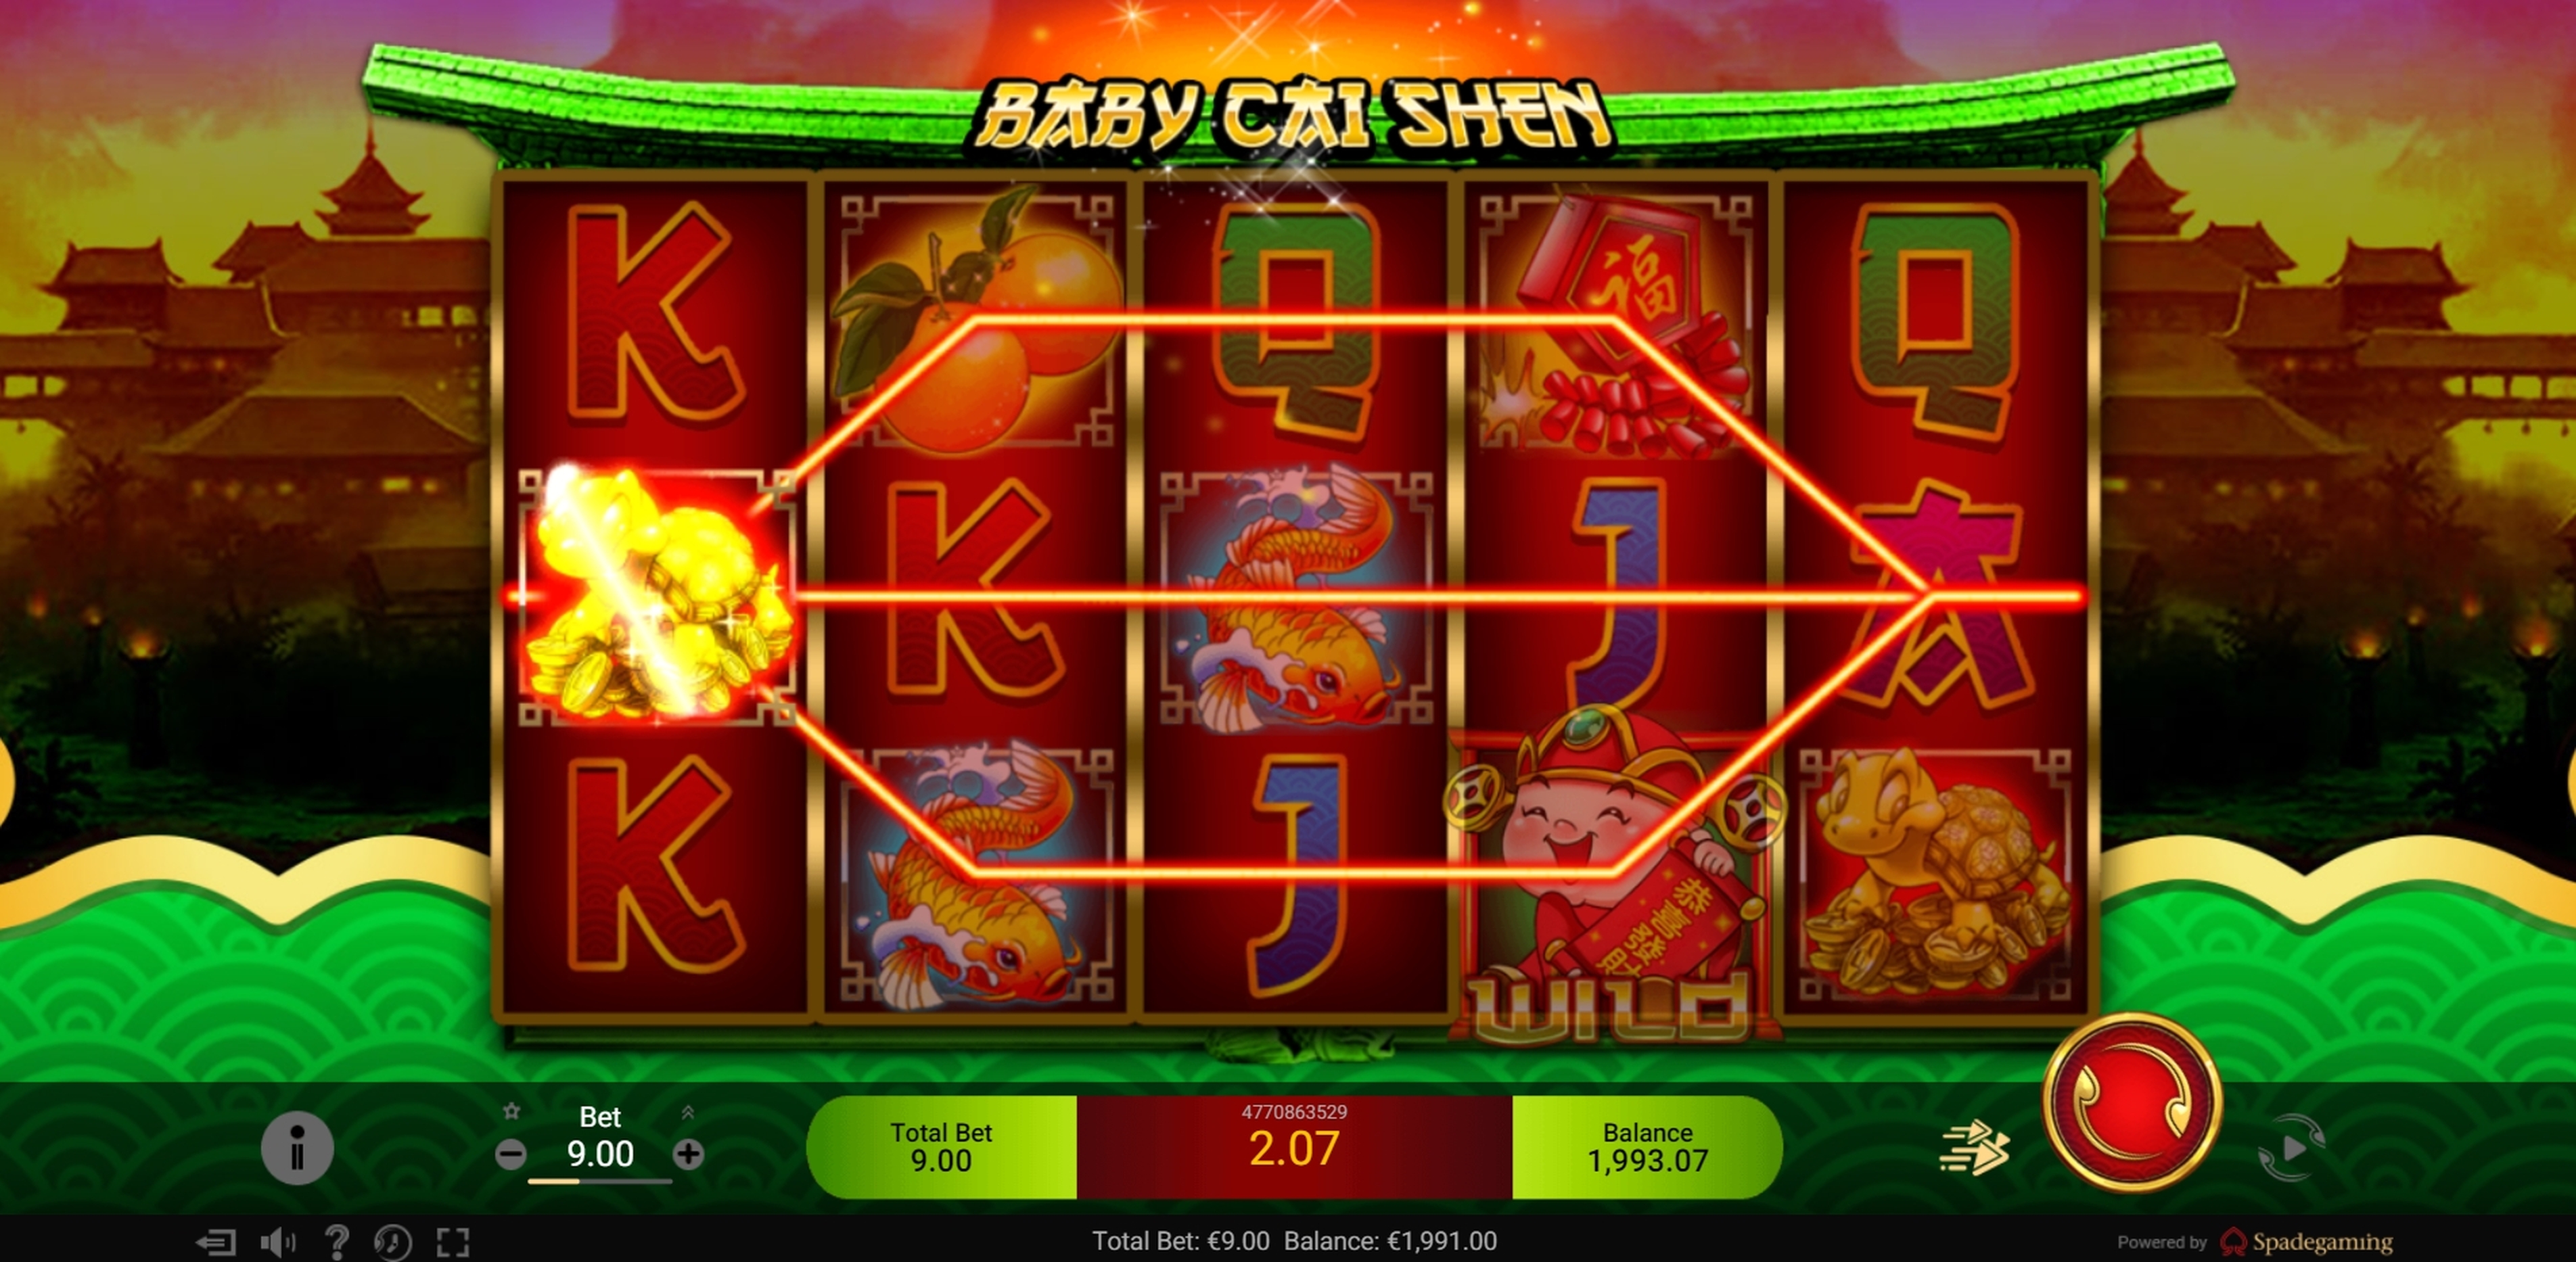 Win Money in Baby Cai Shen Free Slot Game by Spade Gaming